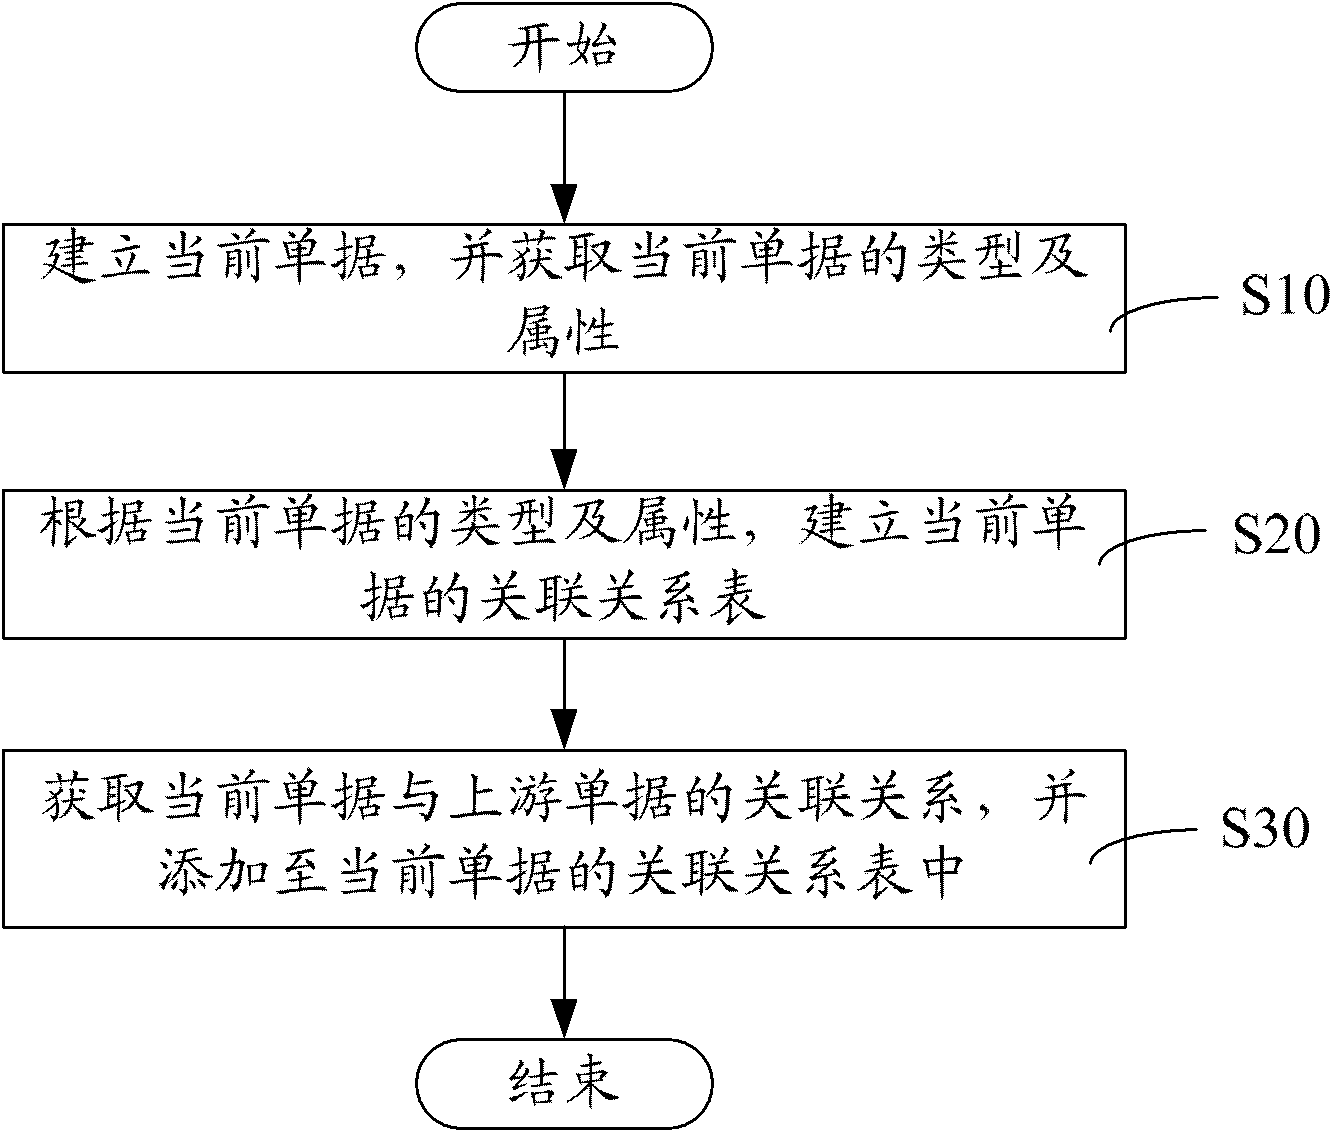 Document associating method and system